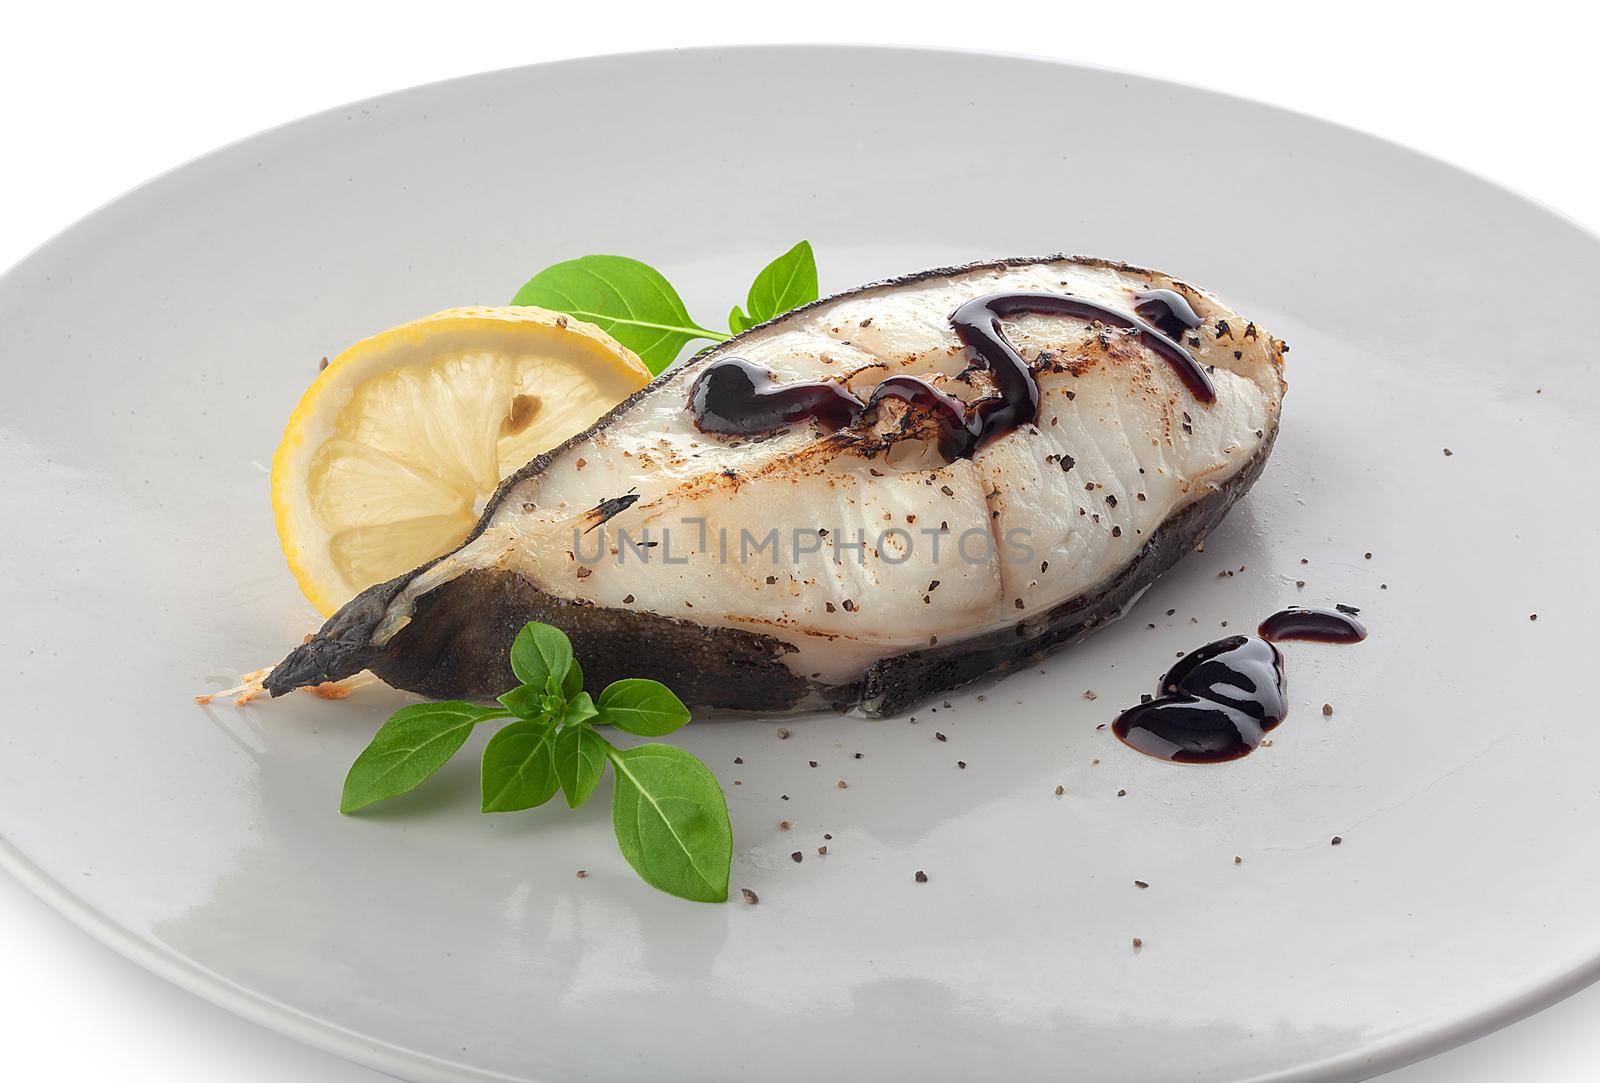 Roasted catfish steak with basil, lemon and balsamic sauce on the plate